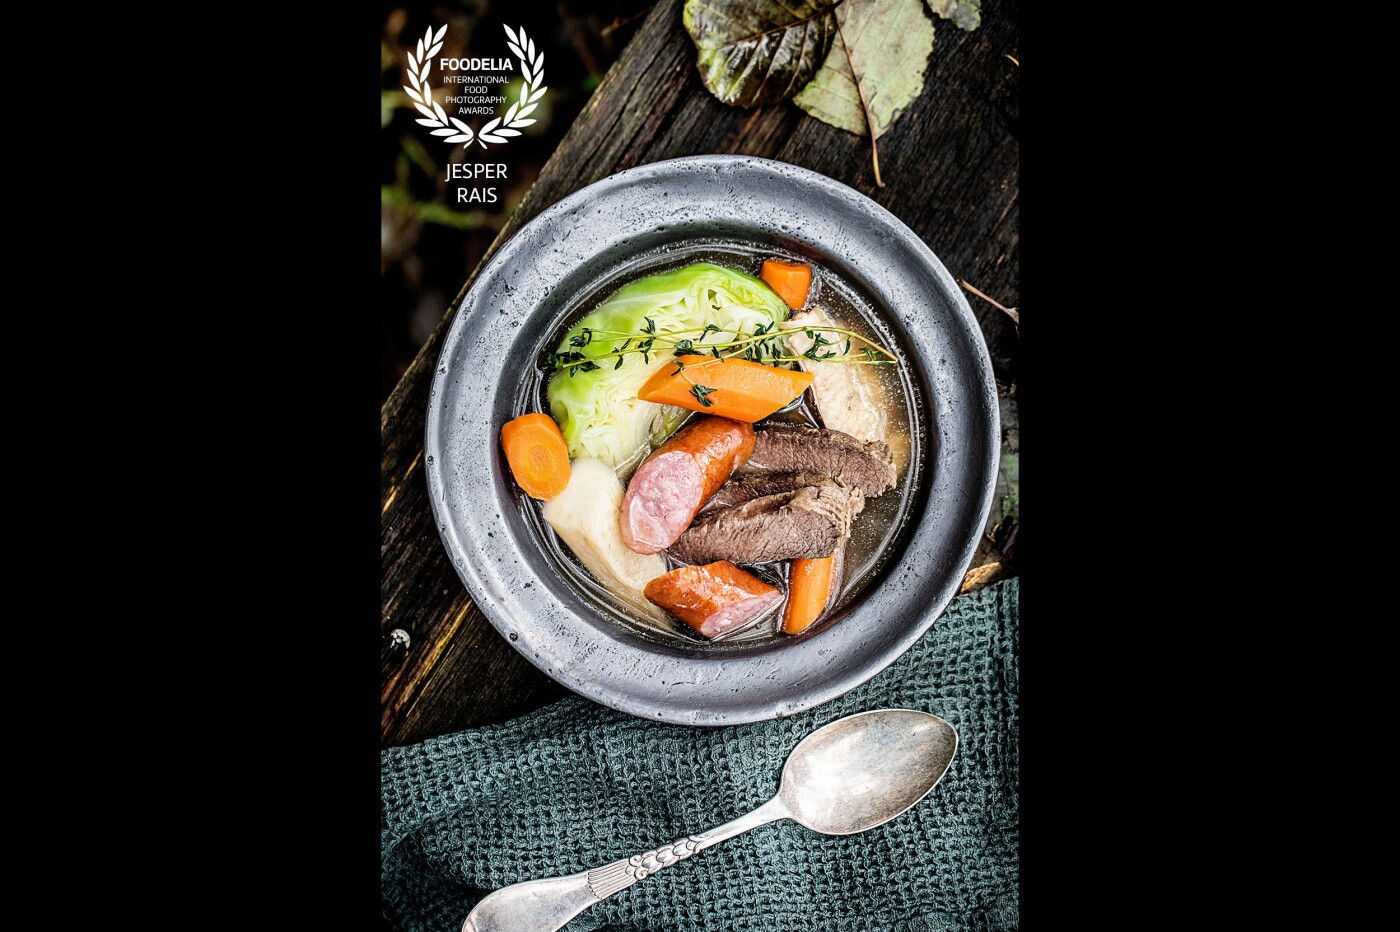 POT-AU-FEU - A recipe from my latest book "THE STORM KITCHEN" with recipes for outdoor life. Cooking outdoor is one of my other passions after food photography, and the chance to combine these two and this book was amazing! 